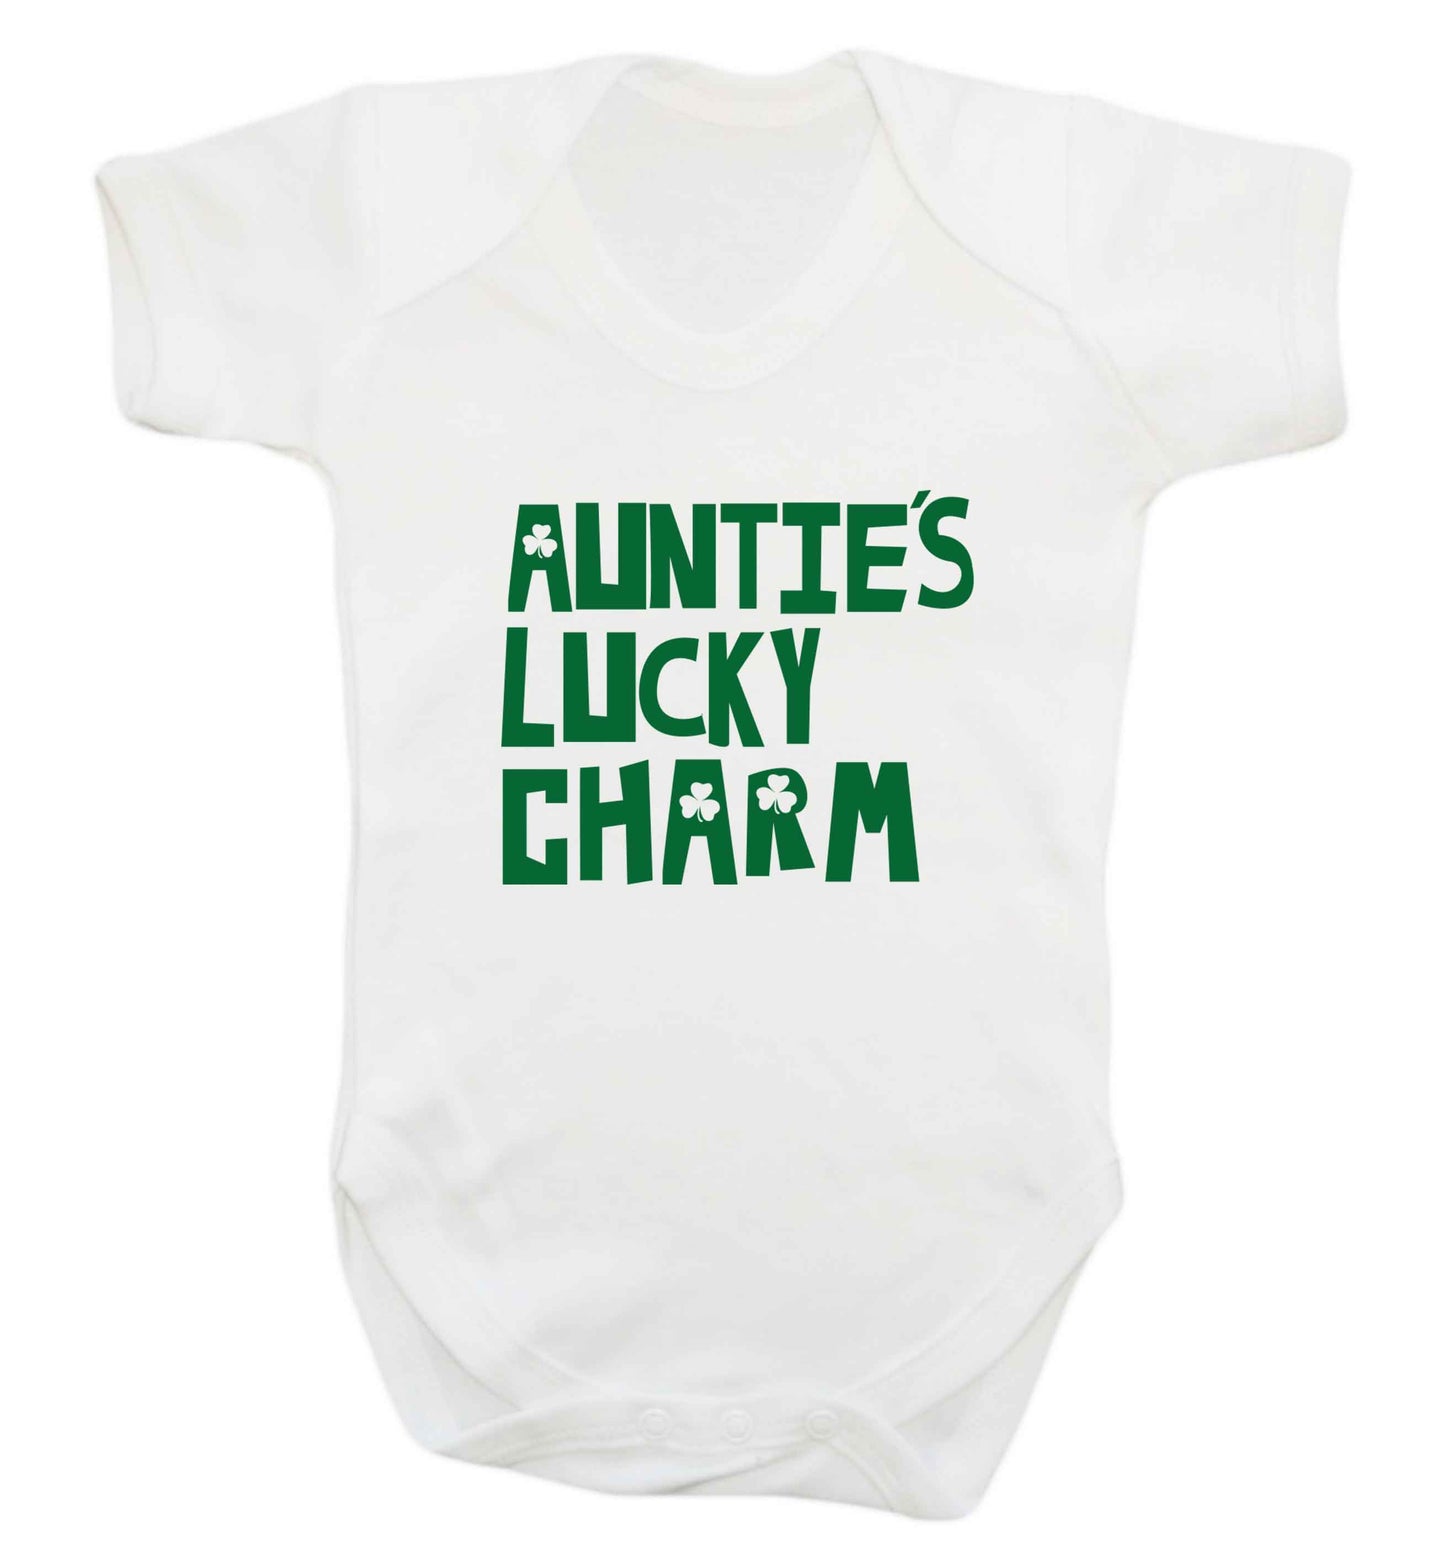 Auntie's lucky charm baby vest white 18-24 months